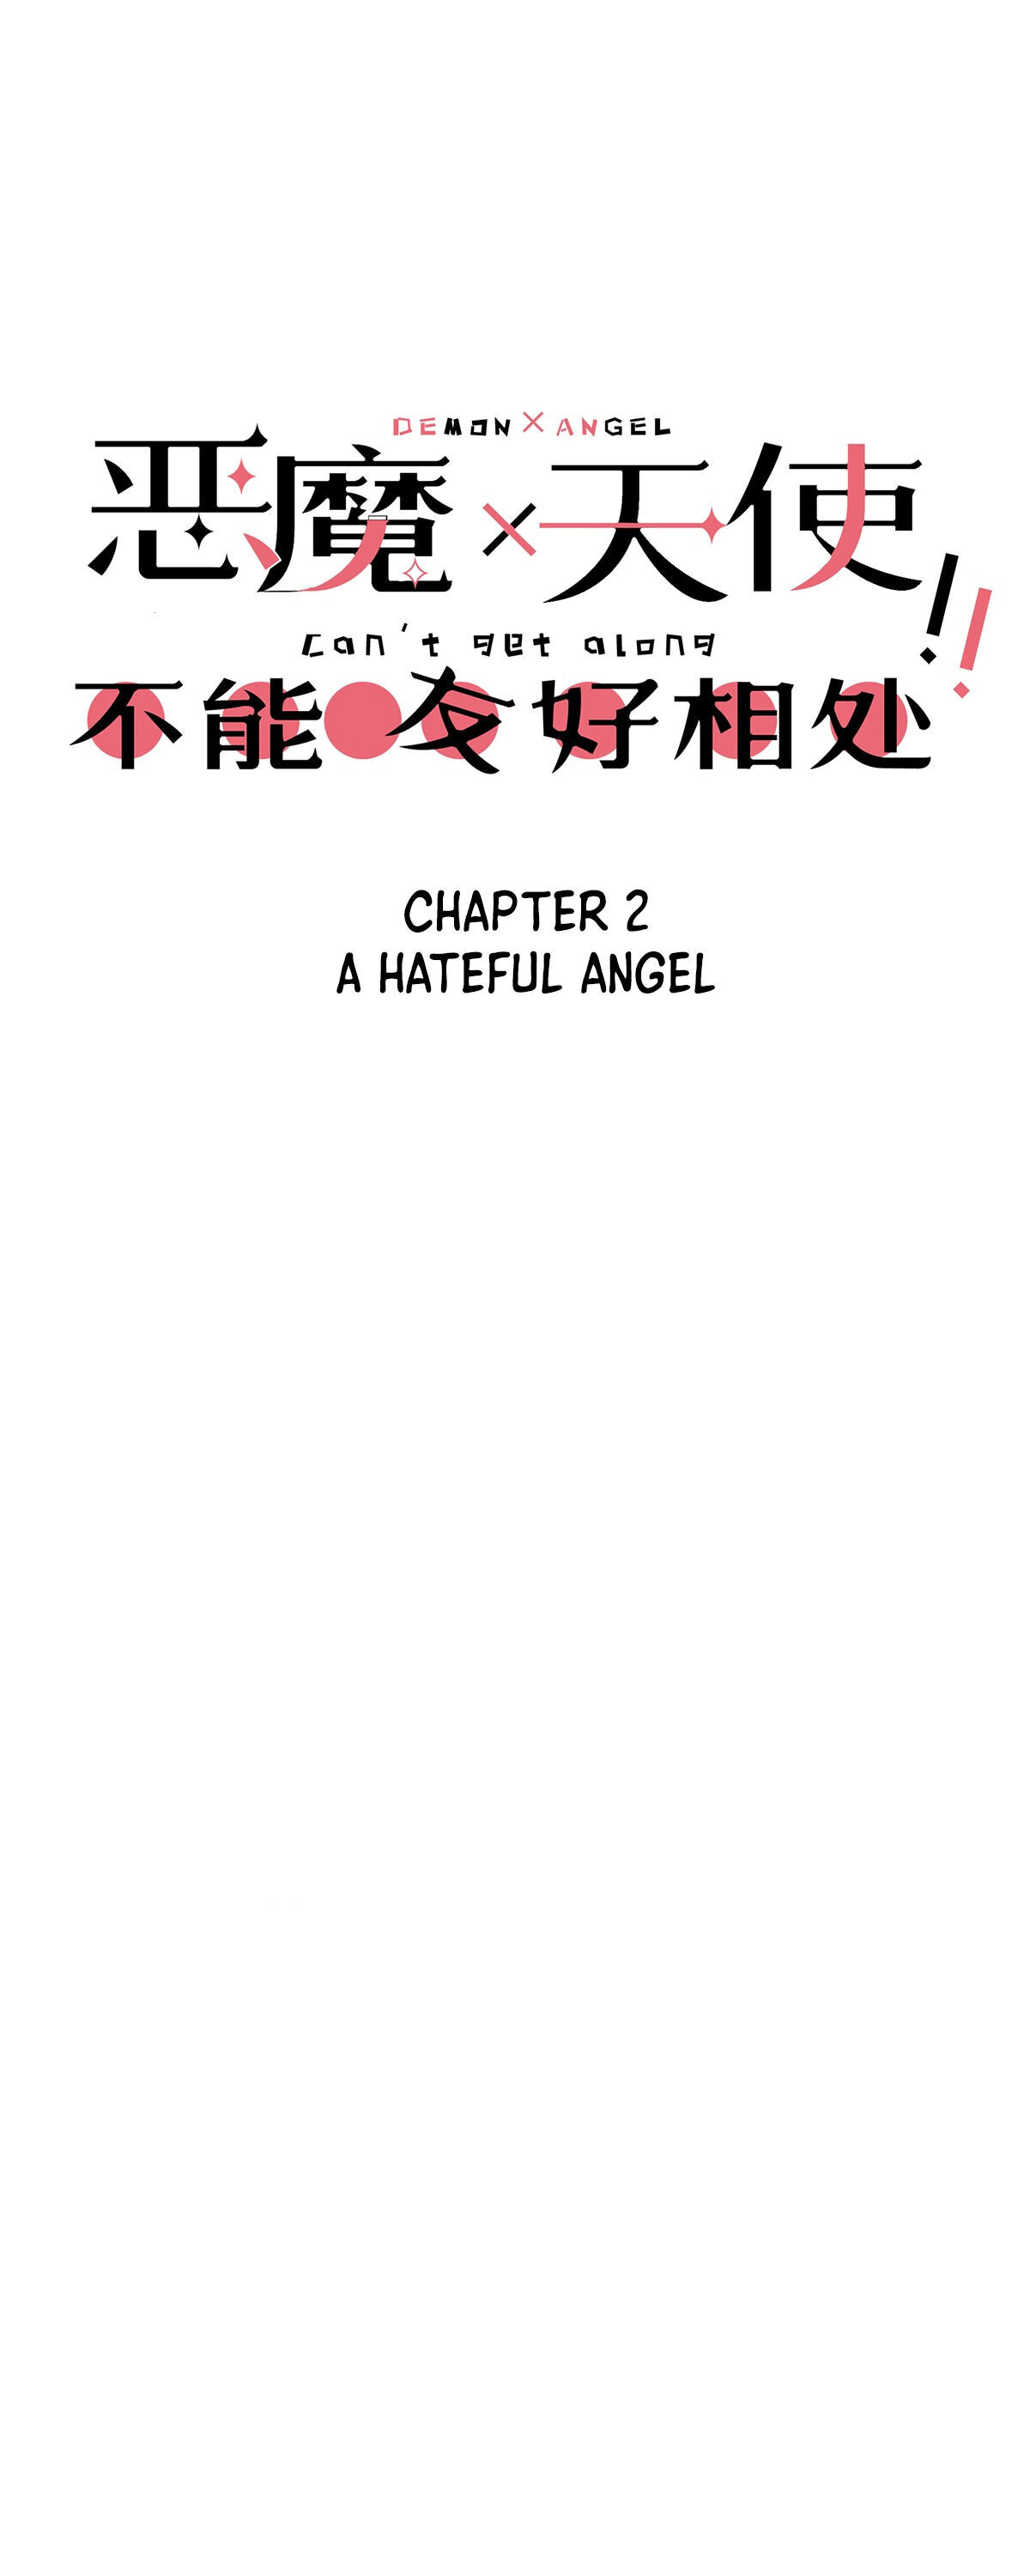 Demon X Angel, Can’T Get Along! Chapter 2